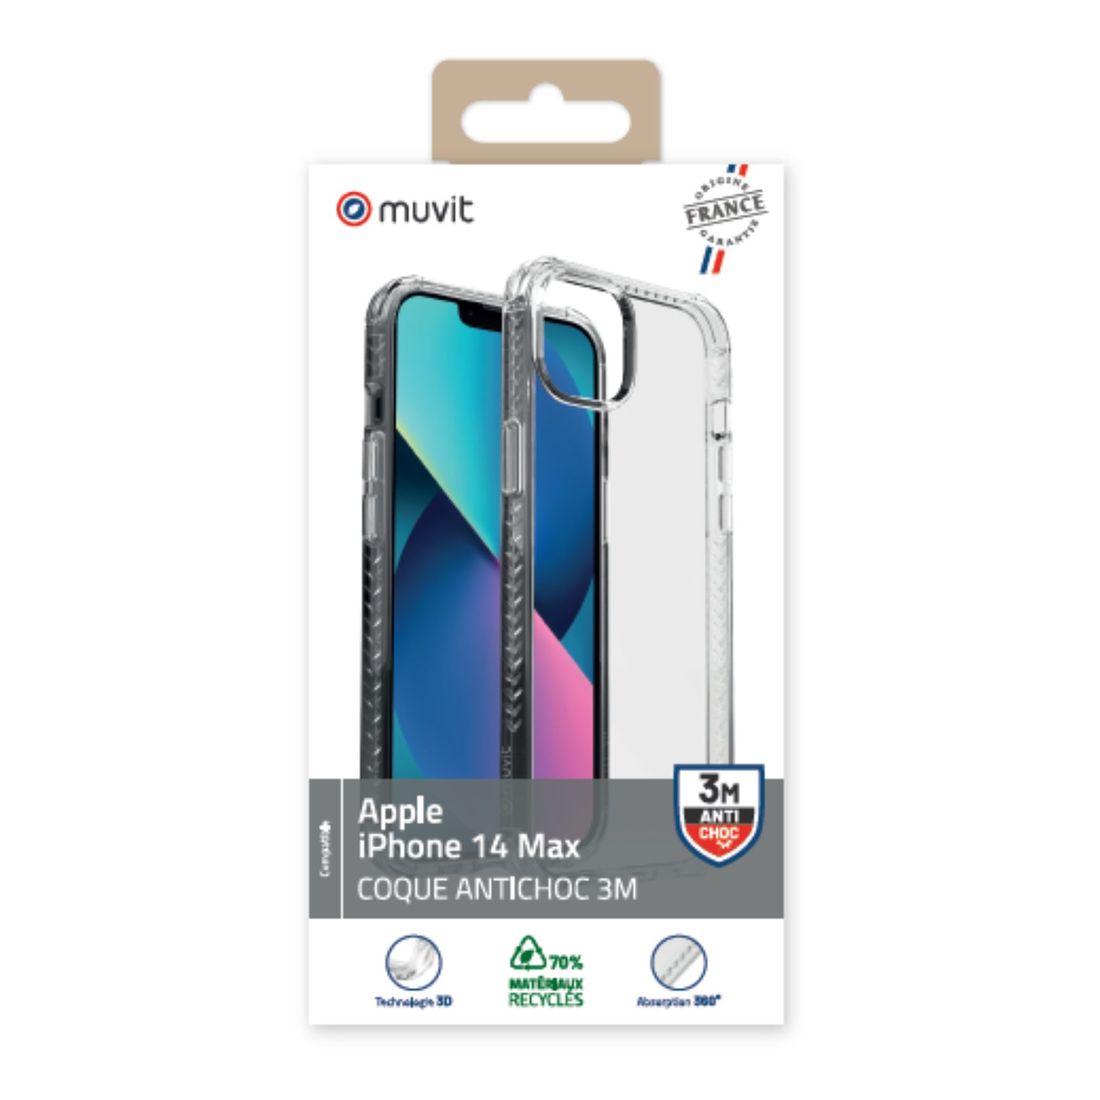 Muvit For France Shockproof Case 3M For iPhone 14 Pro - Clear